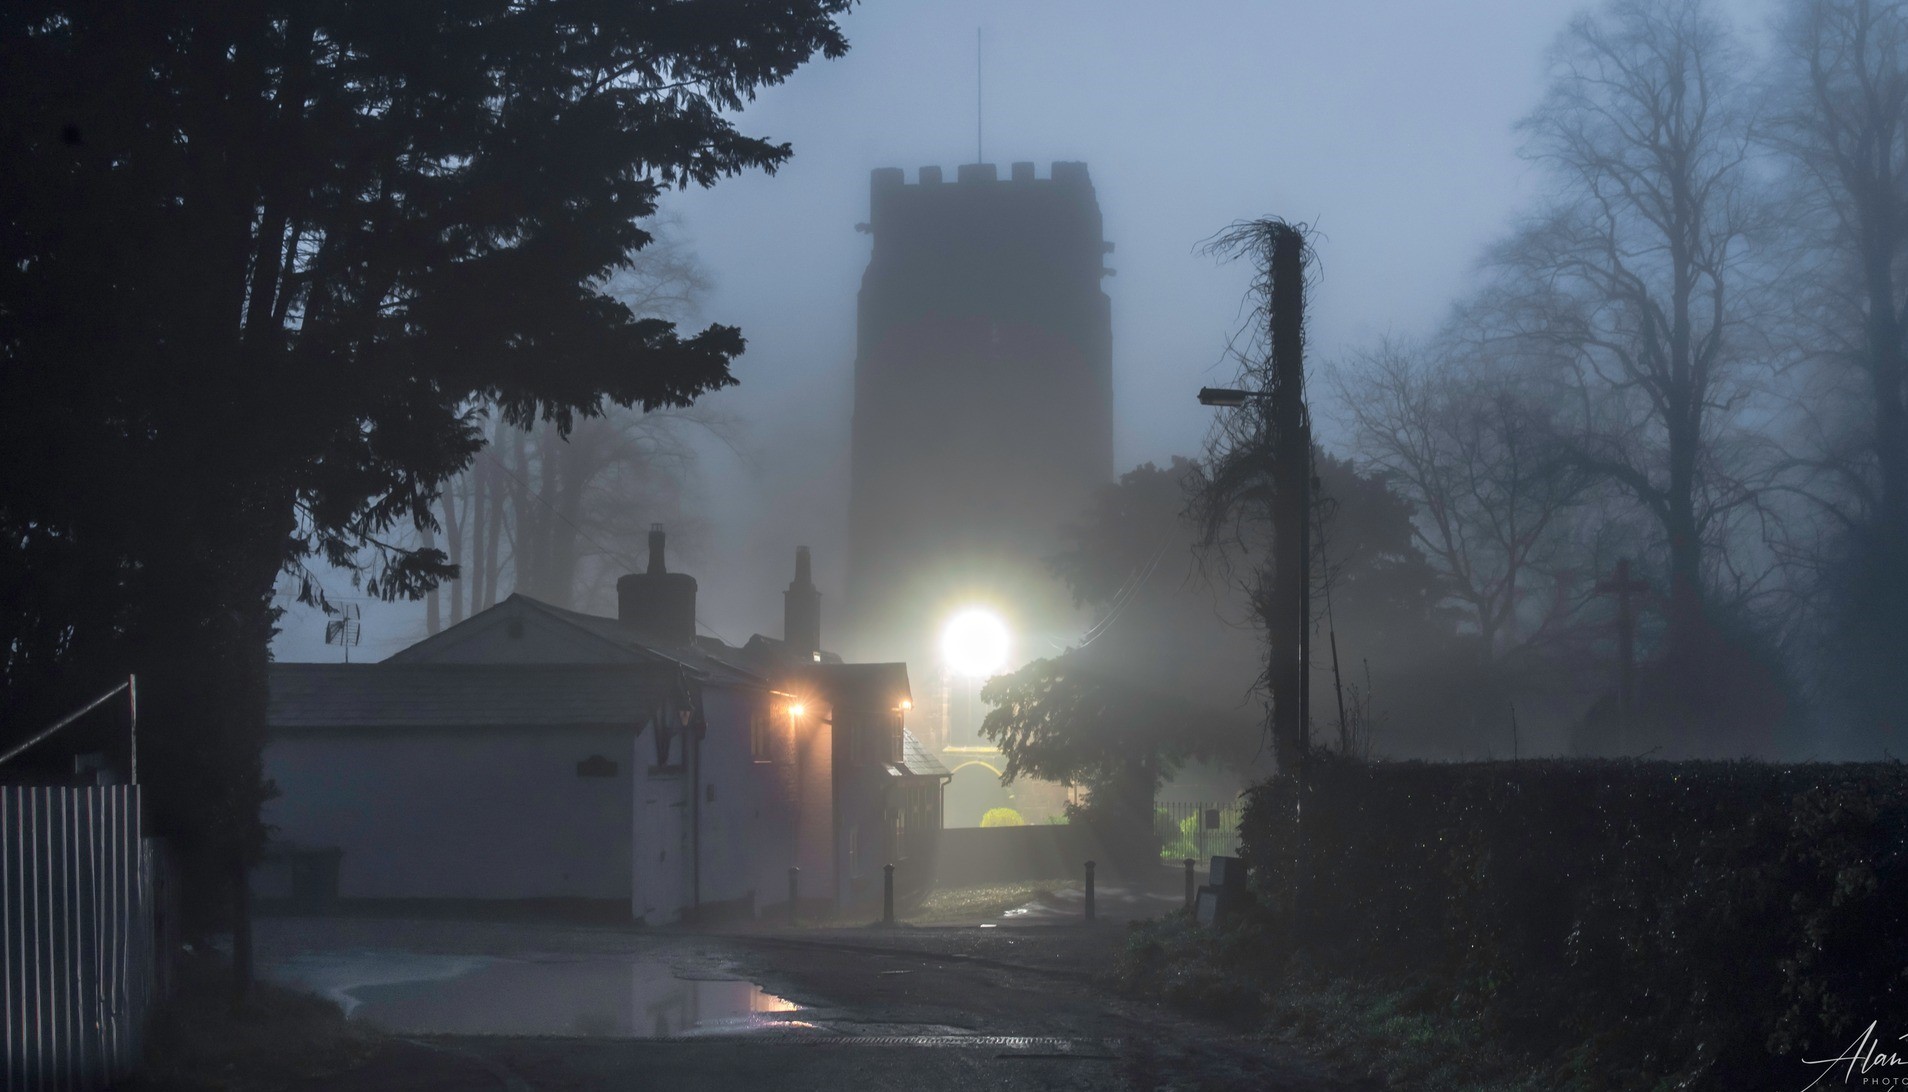 A mysterious St Chads by Alan Bailey